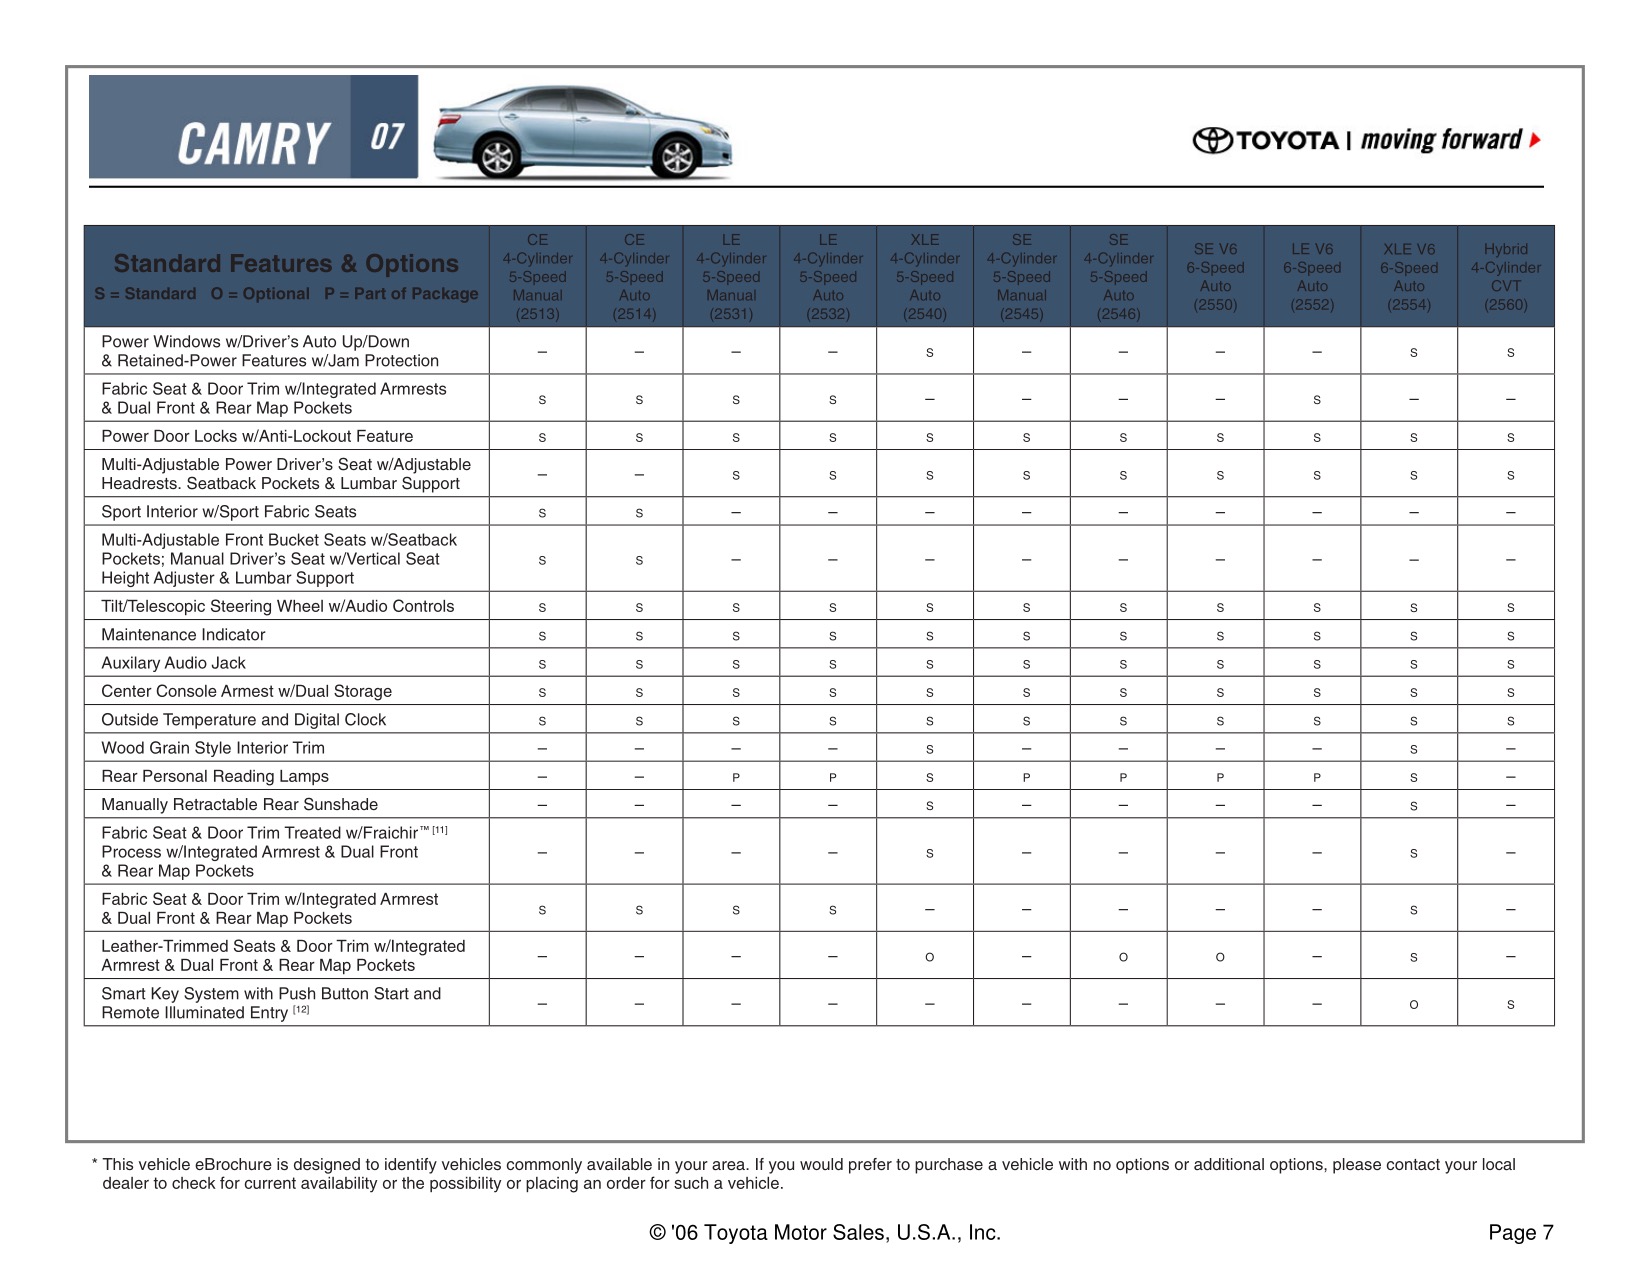 2007 Toyota Camry Brochure Page 11